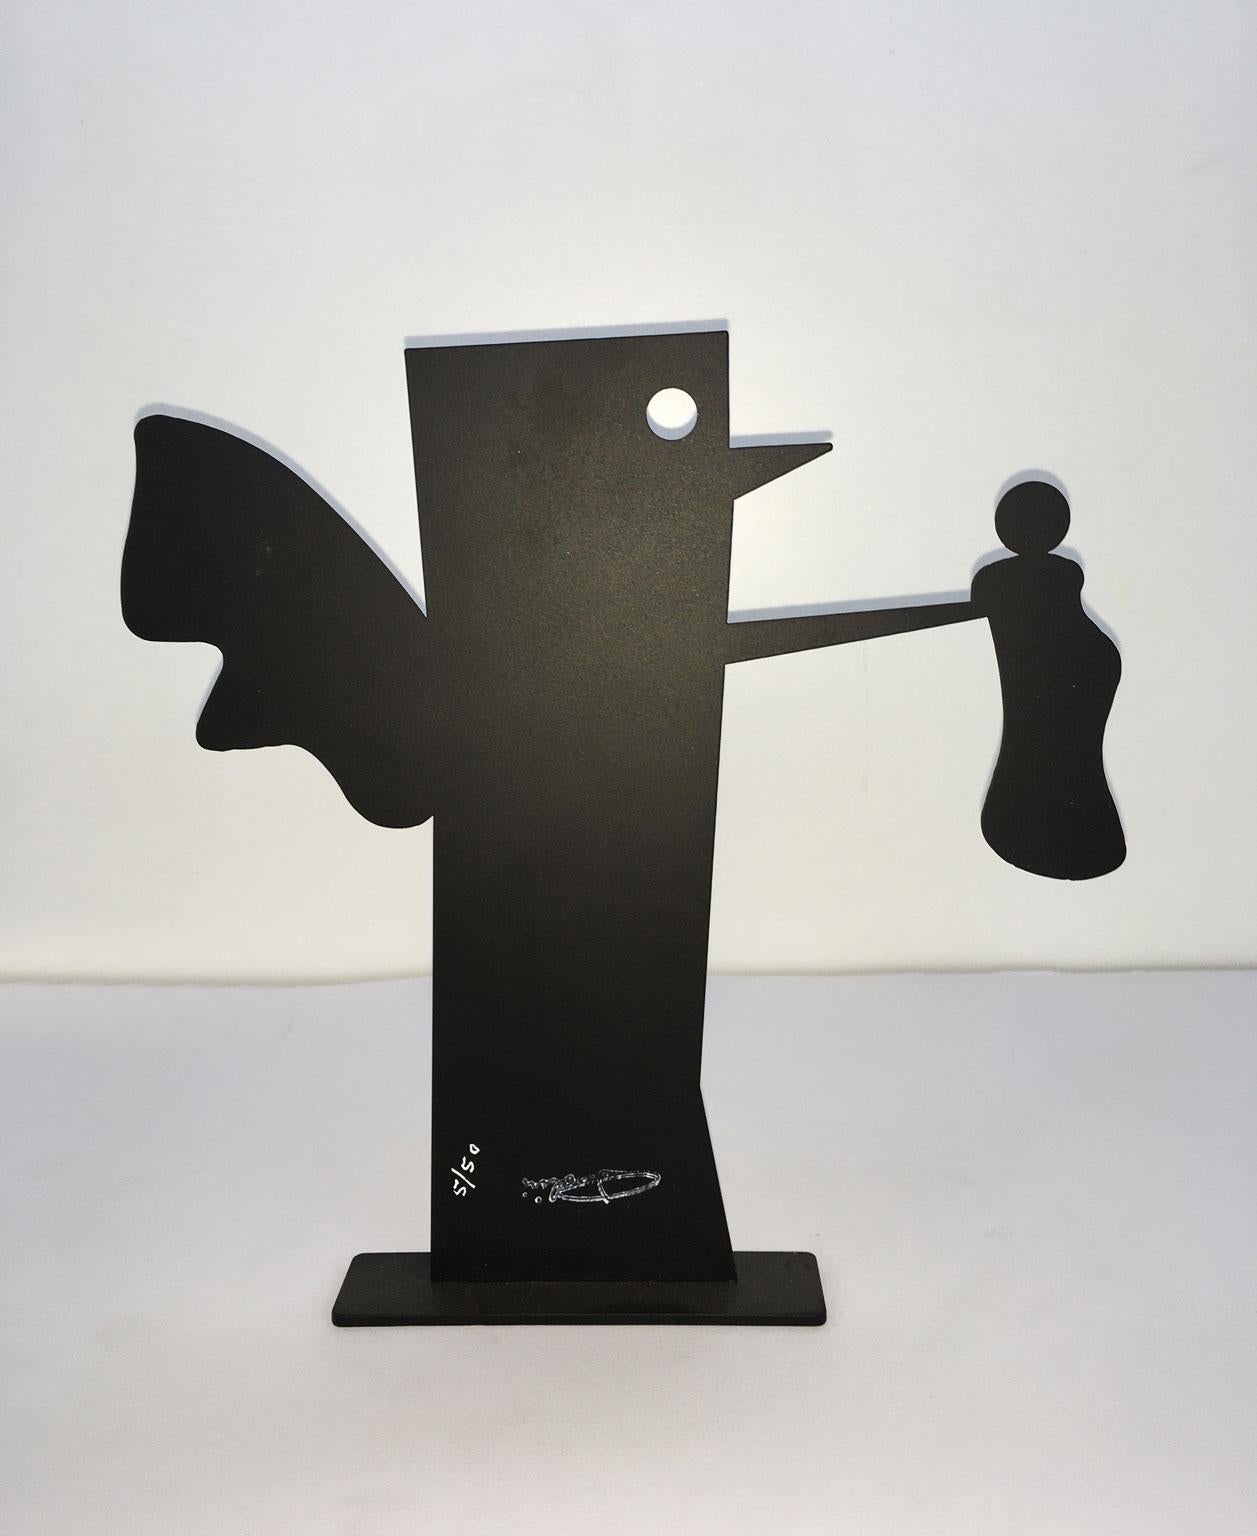 Italy 1980 Riccardo Dalisi Black Metal Painted Sculpture Caffellatte For Sale 4